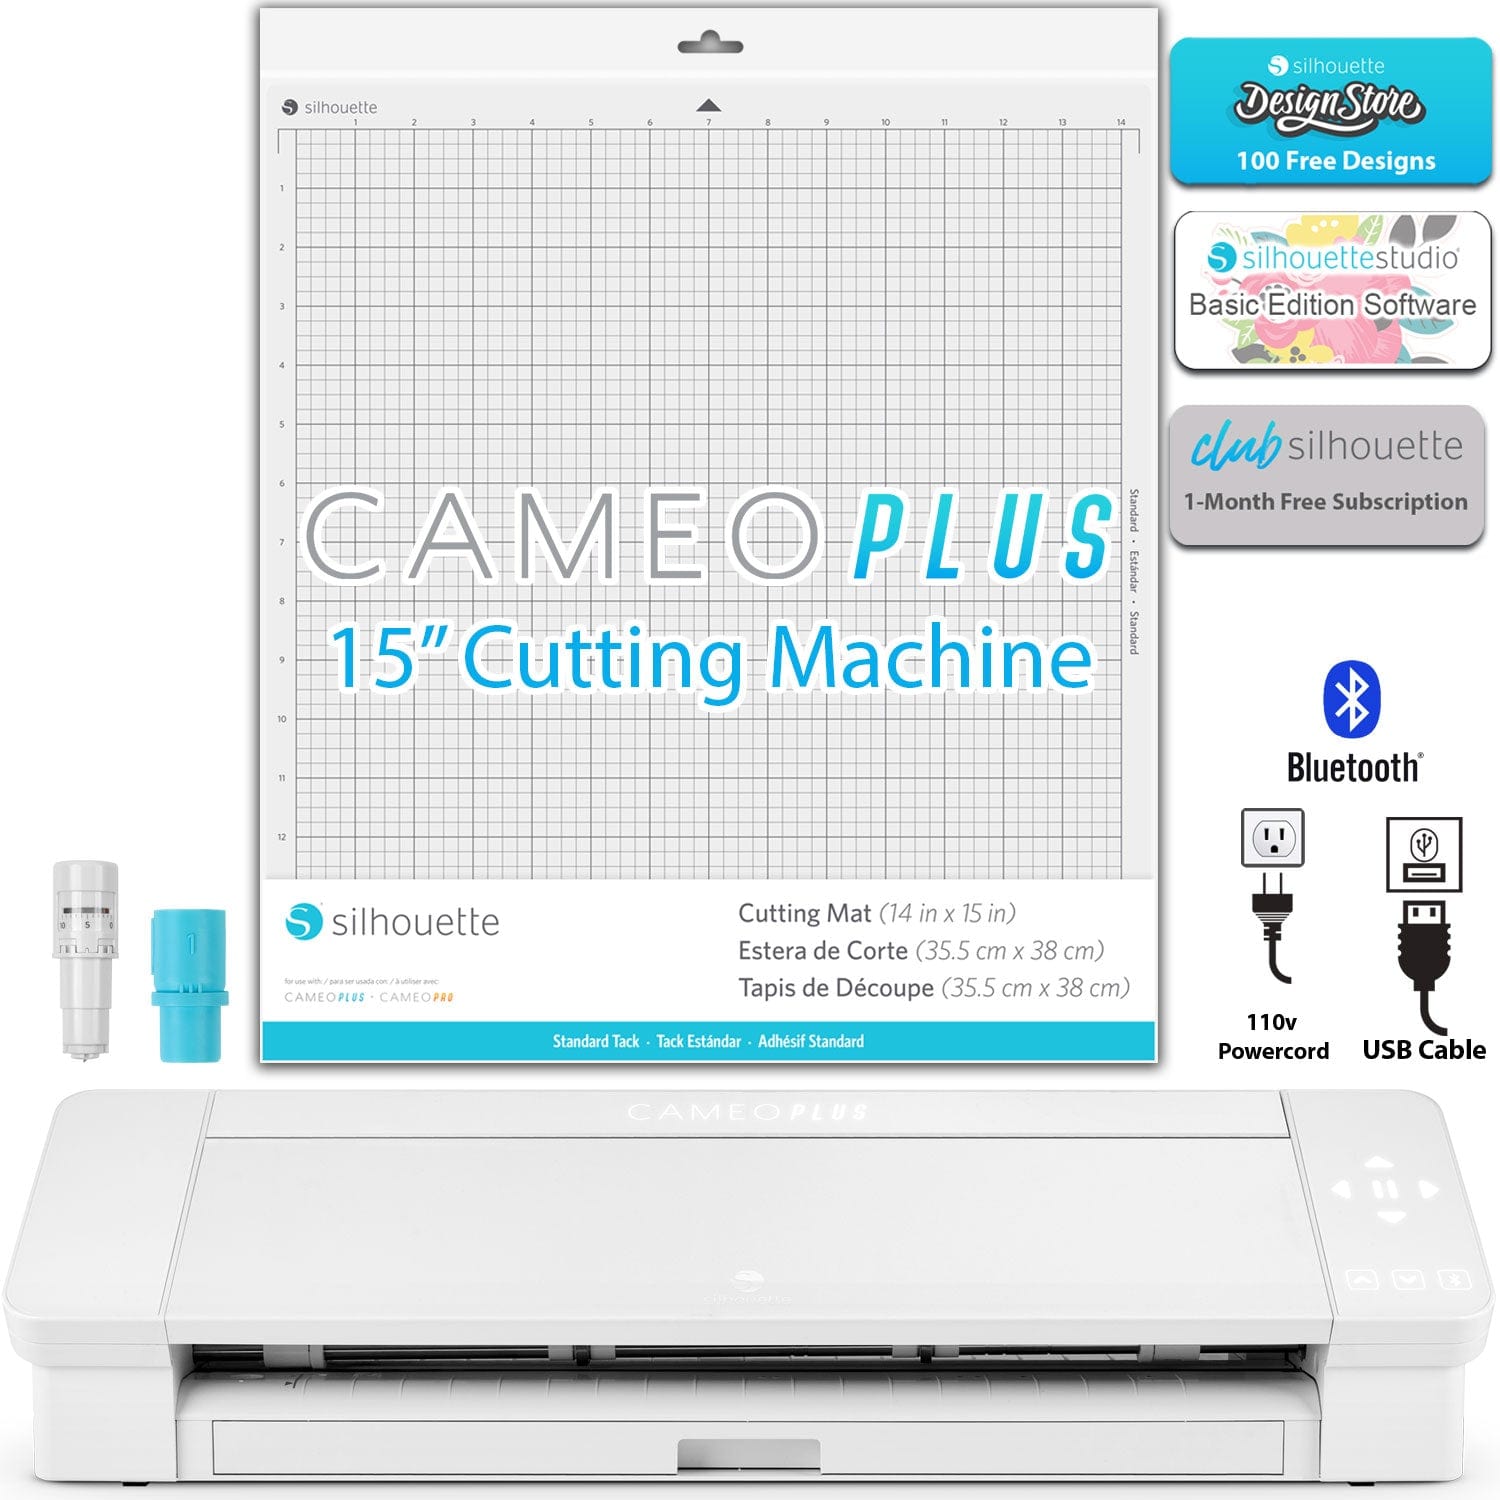 NEW Silhouette Cameo 4 plus bonuses - arts & crafts - by owner